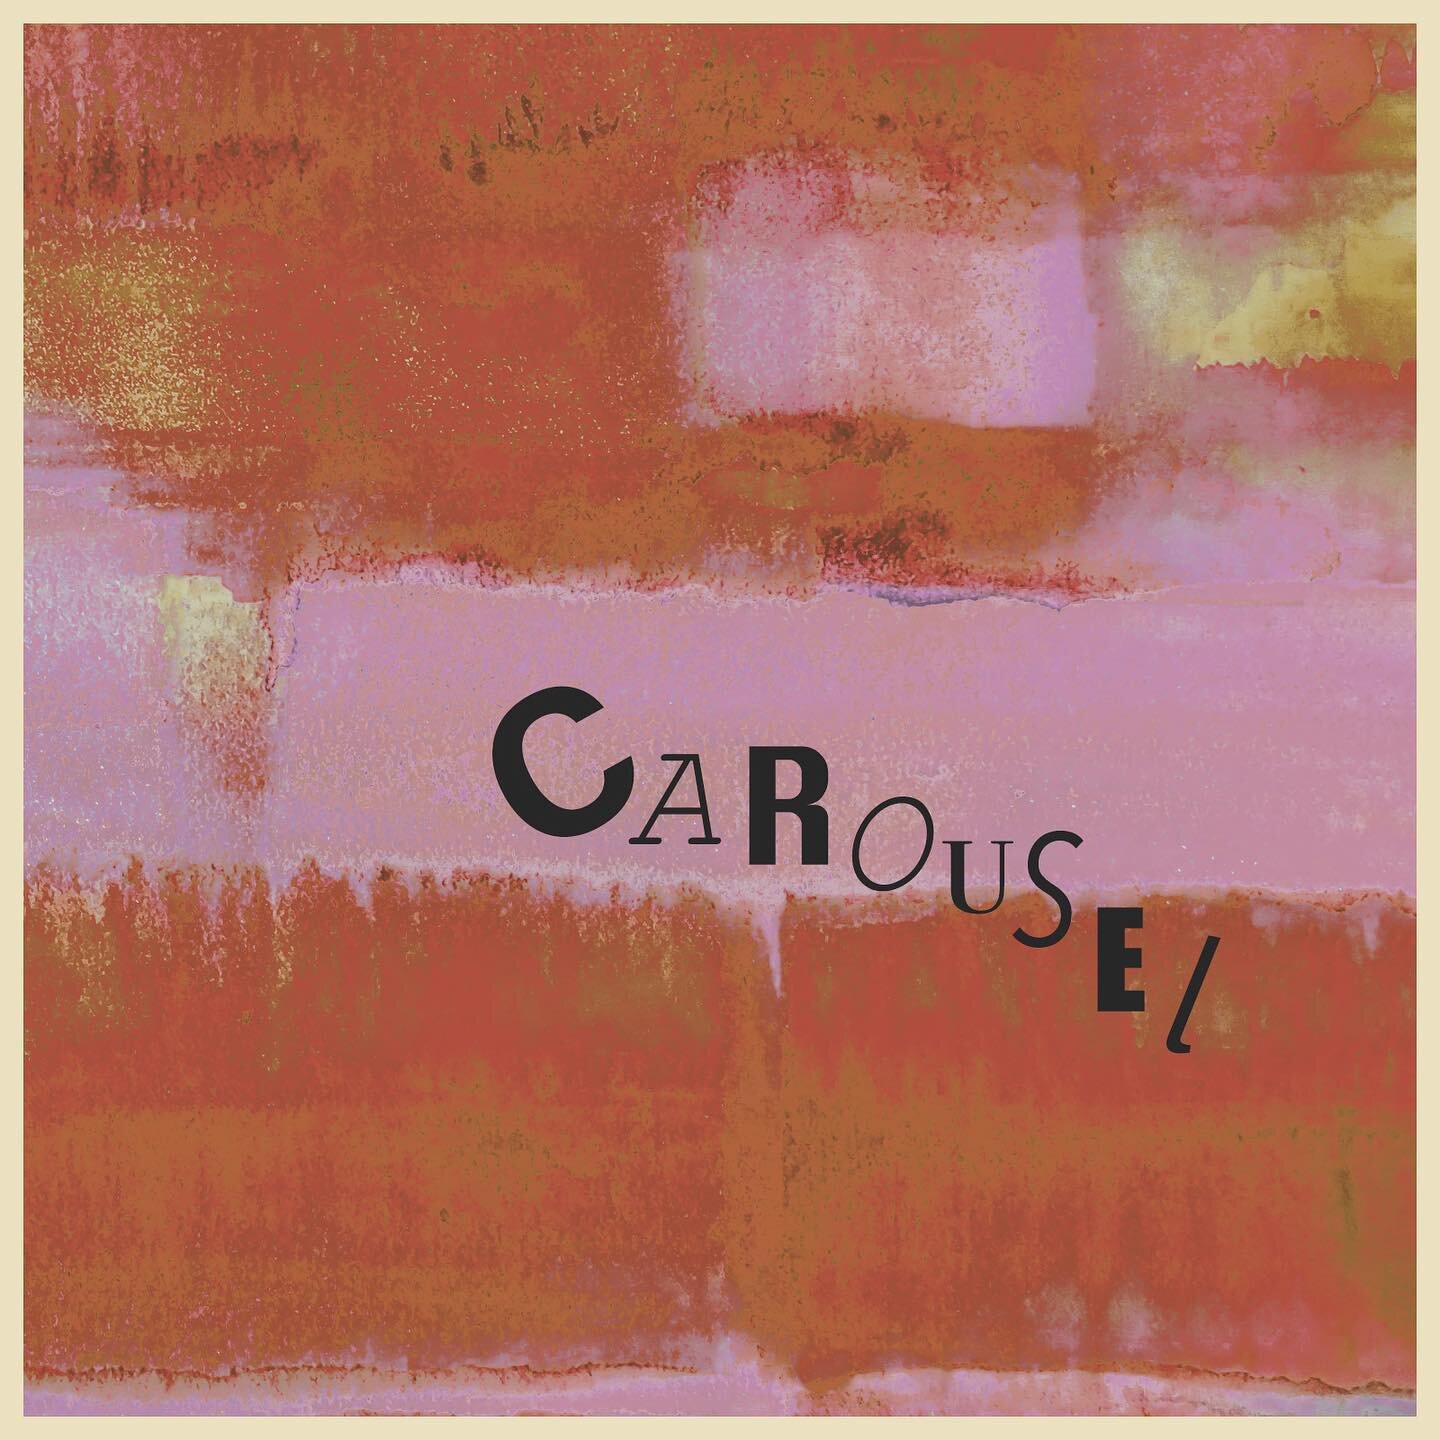 I originally painted this as part of 5 pieces for @artnewellmusic EP. But there was something in it that worked with Carousel, so I kept it (and painted him a different one) Thanks again for all the looking and listening. I have a brand new song out 